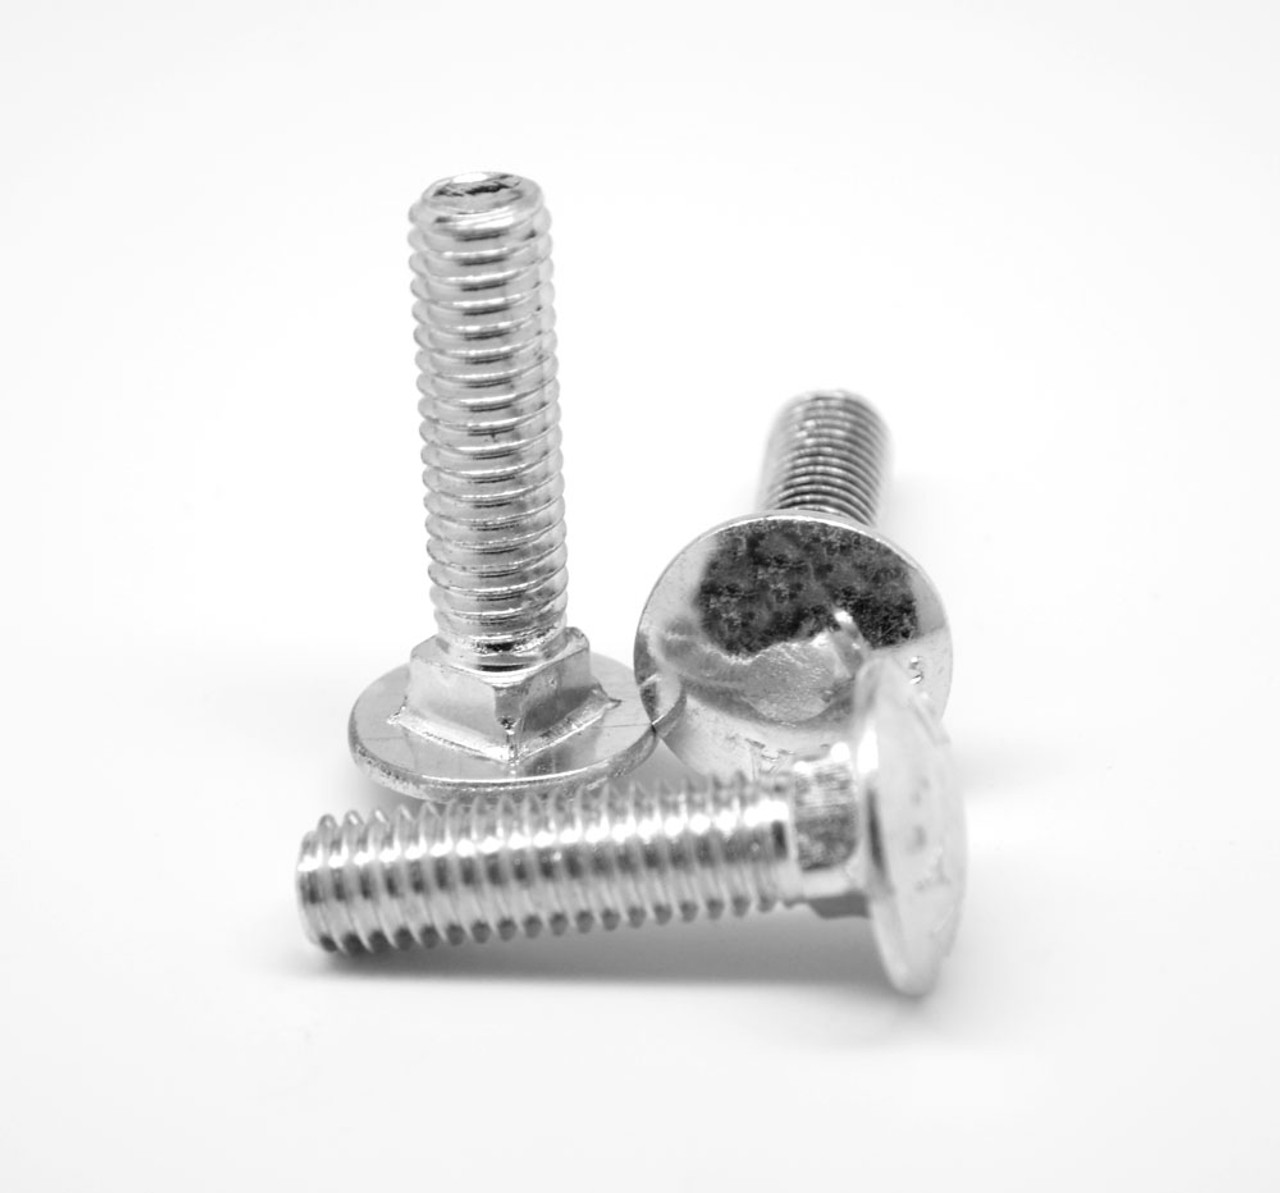 M8 x 1.25 x 50 MM (FT) Coarse Thread DIN 603 Class 4.6 Carriage Bolt Low Carbon Steel Zinc Plated